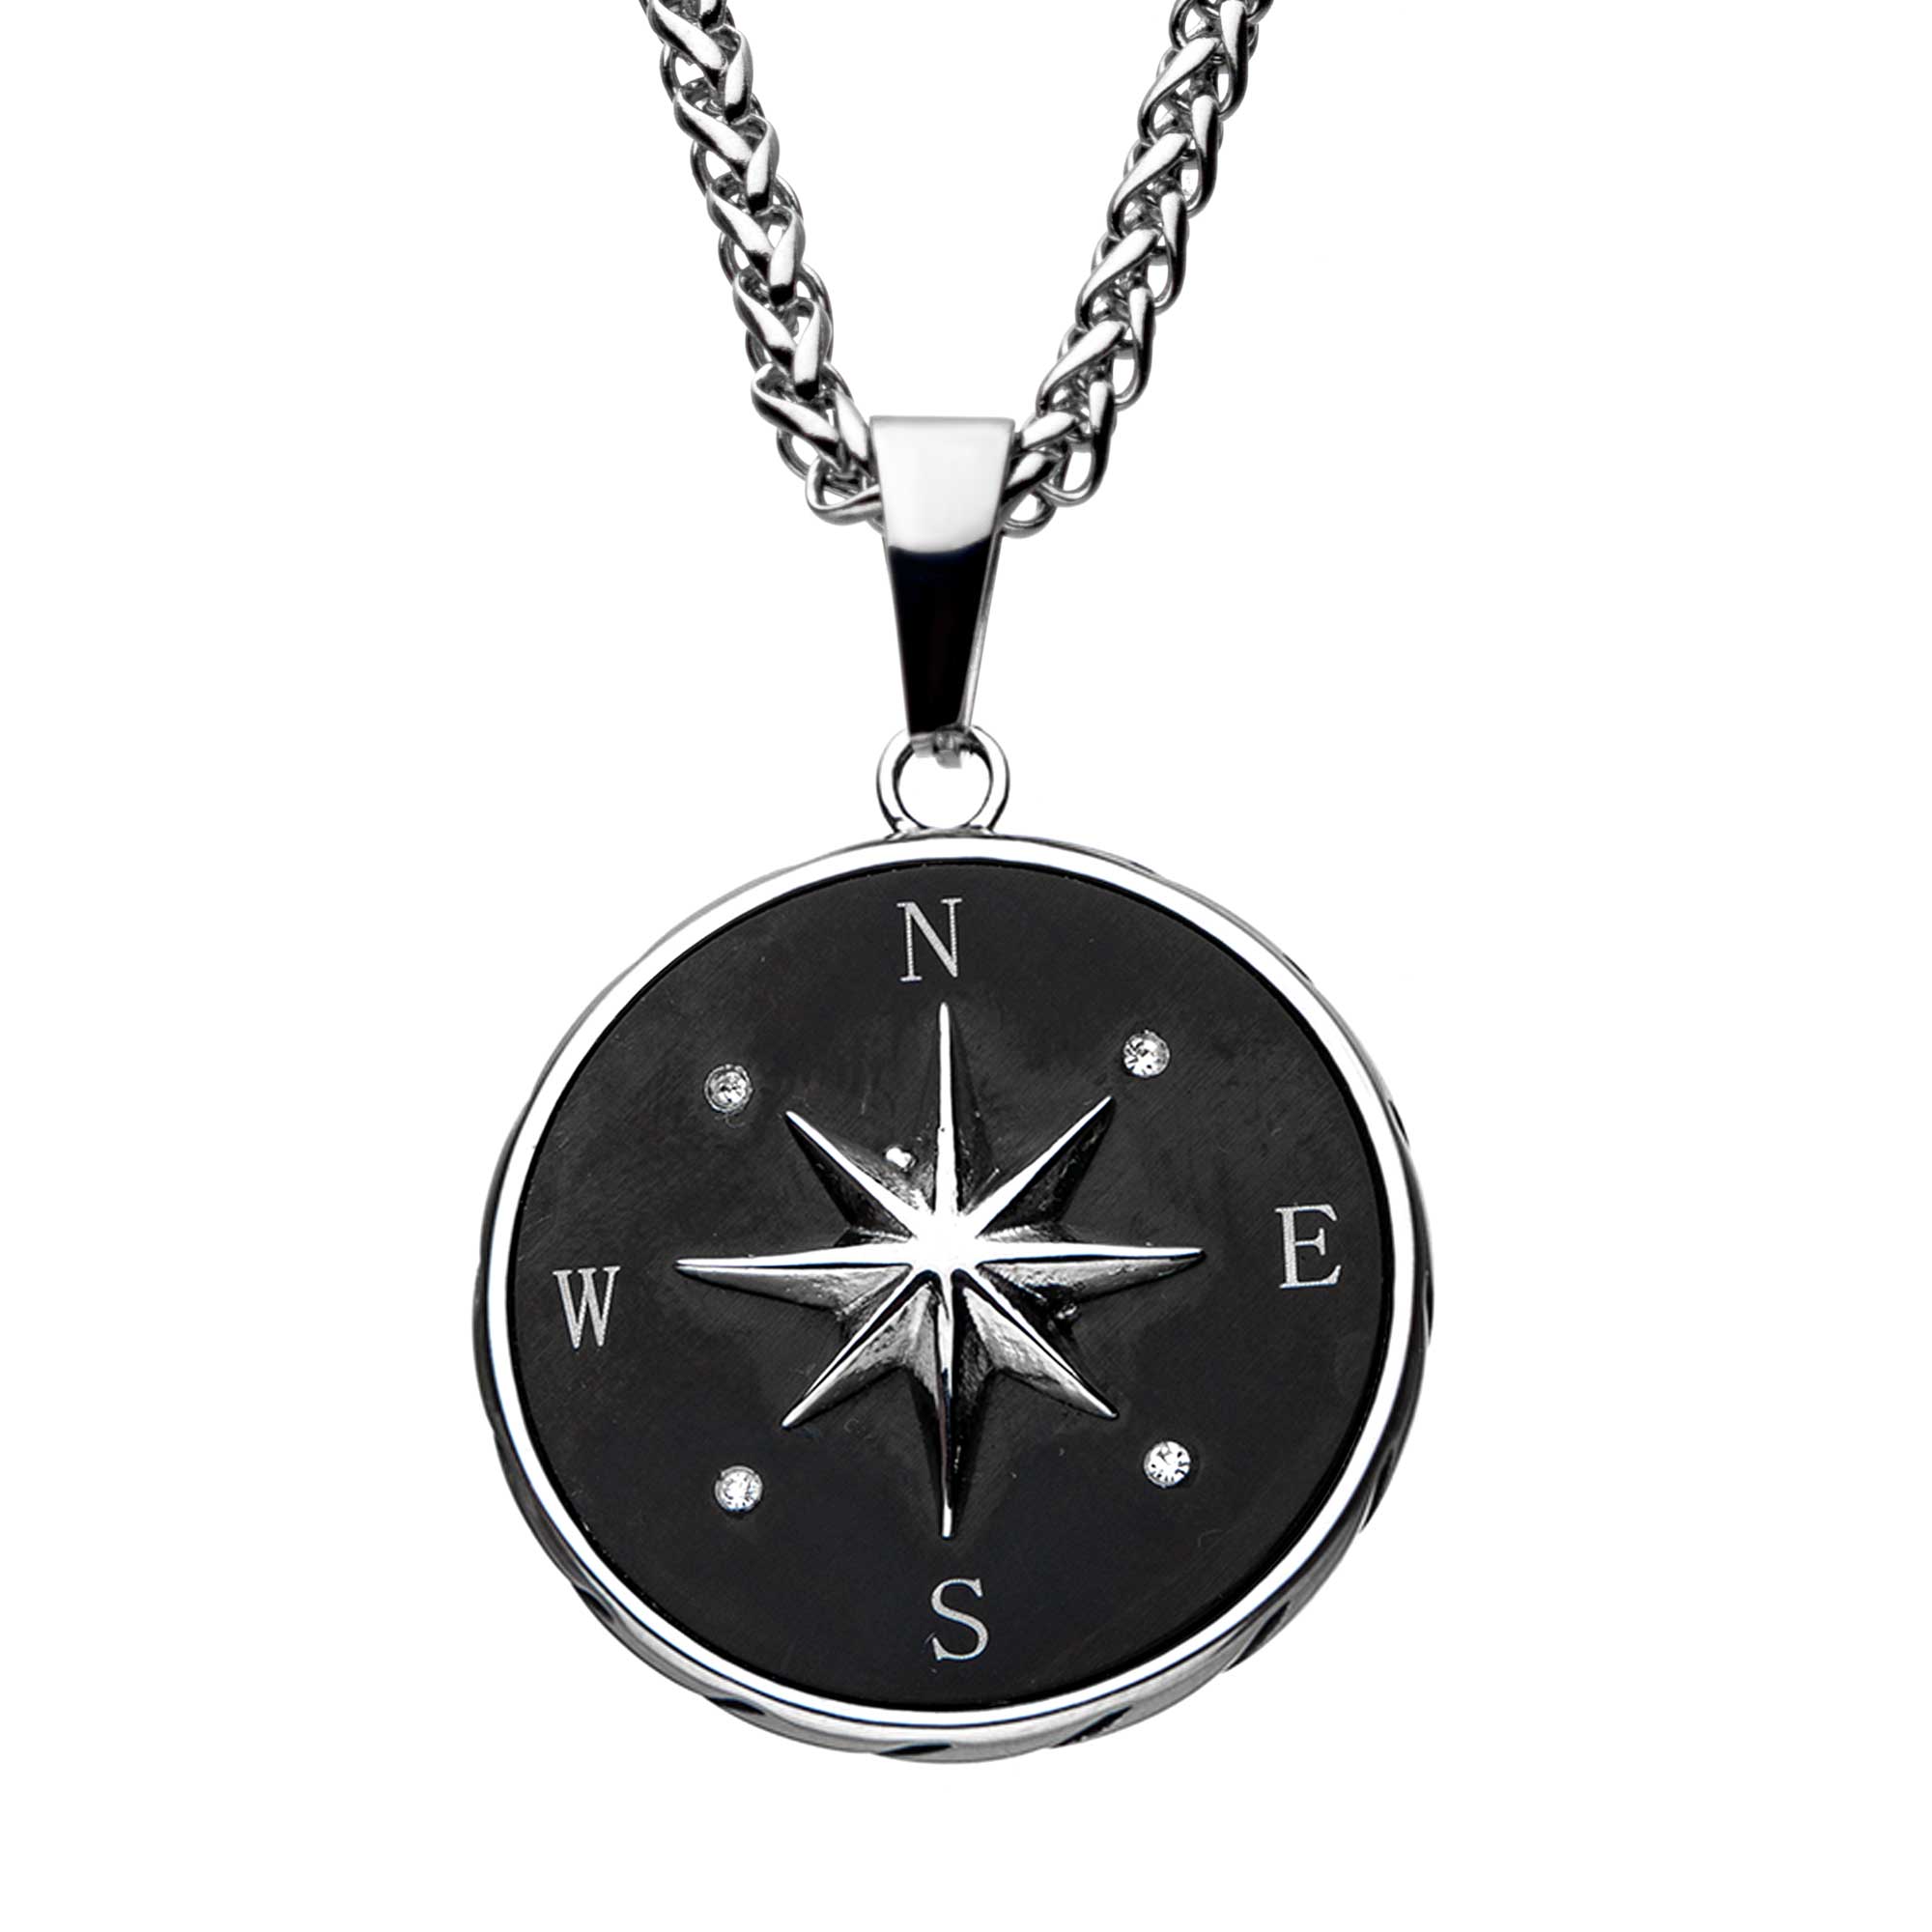 Stainless Steel and Black Plated Compass Pendant with Chain P.K. Bennett Jewelers Mundelein, IL